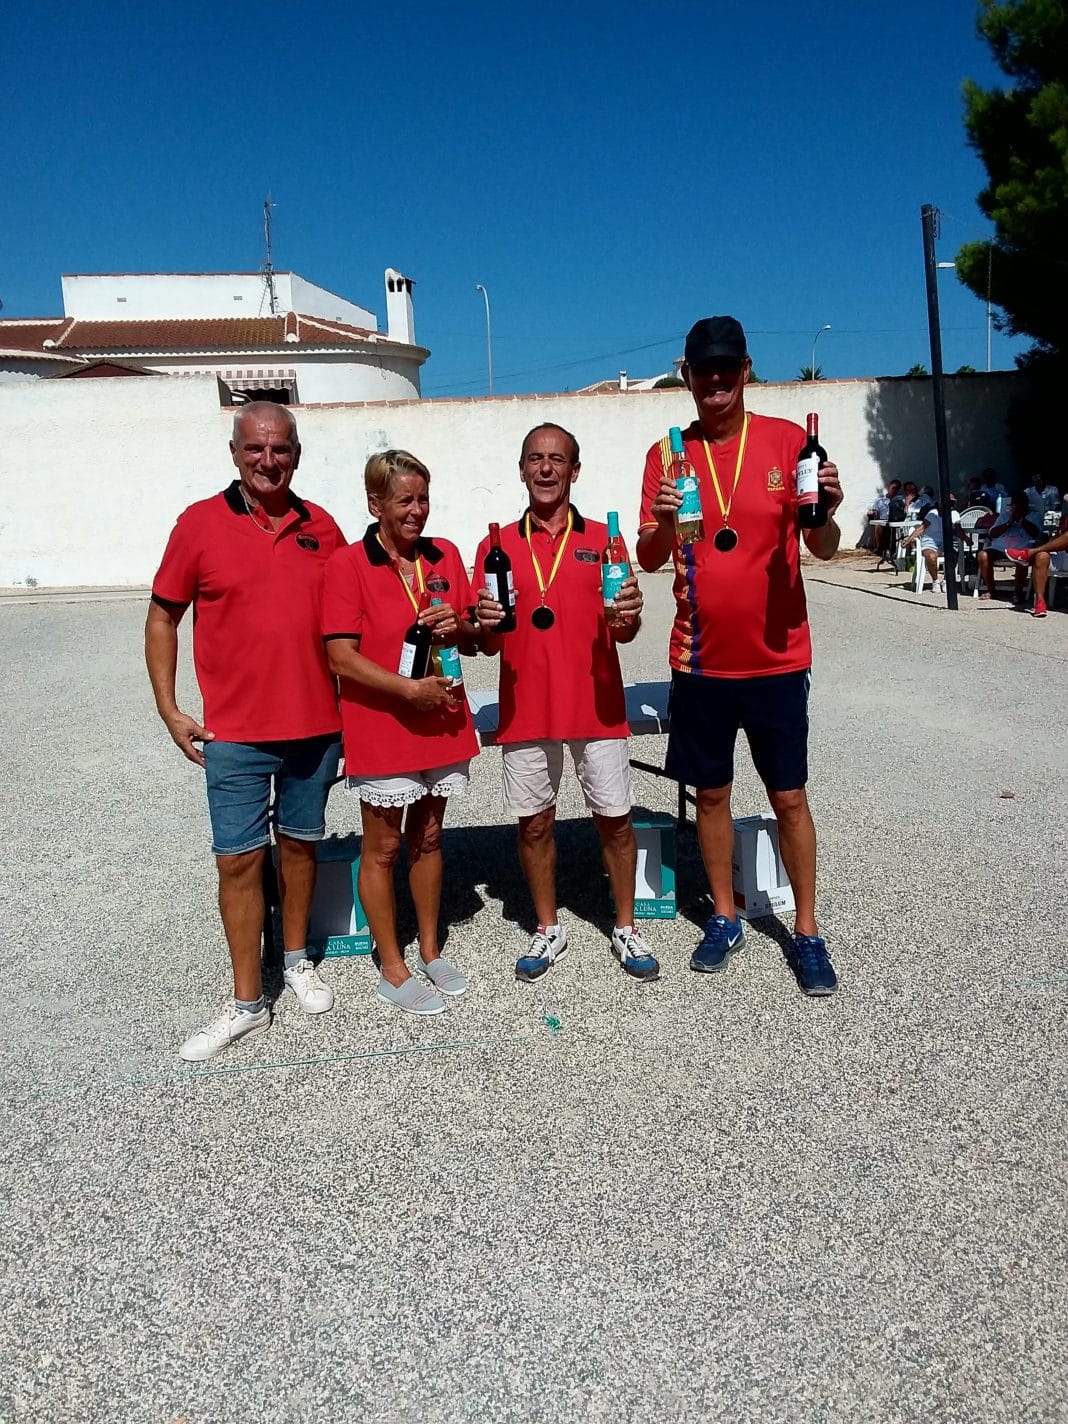 The WINNERS ON THE day with 4 wins were team Mediterraneo Piranas with 4 wins